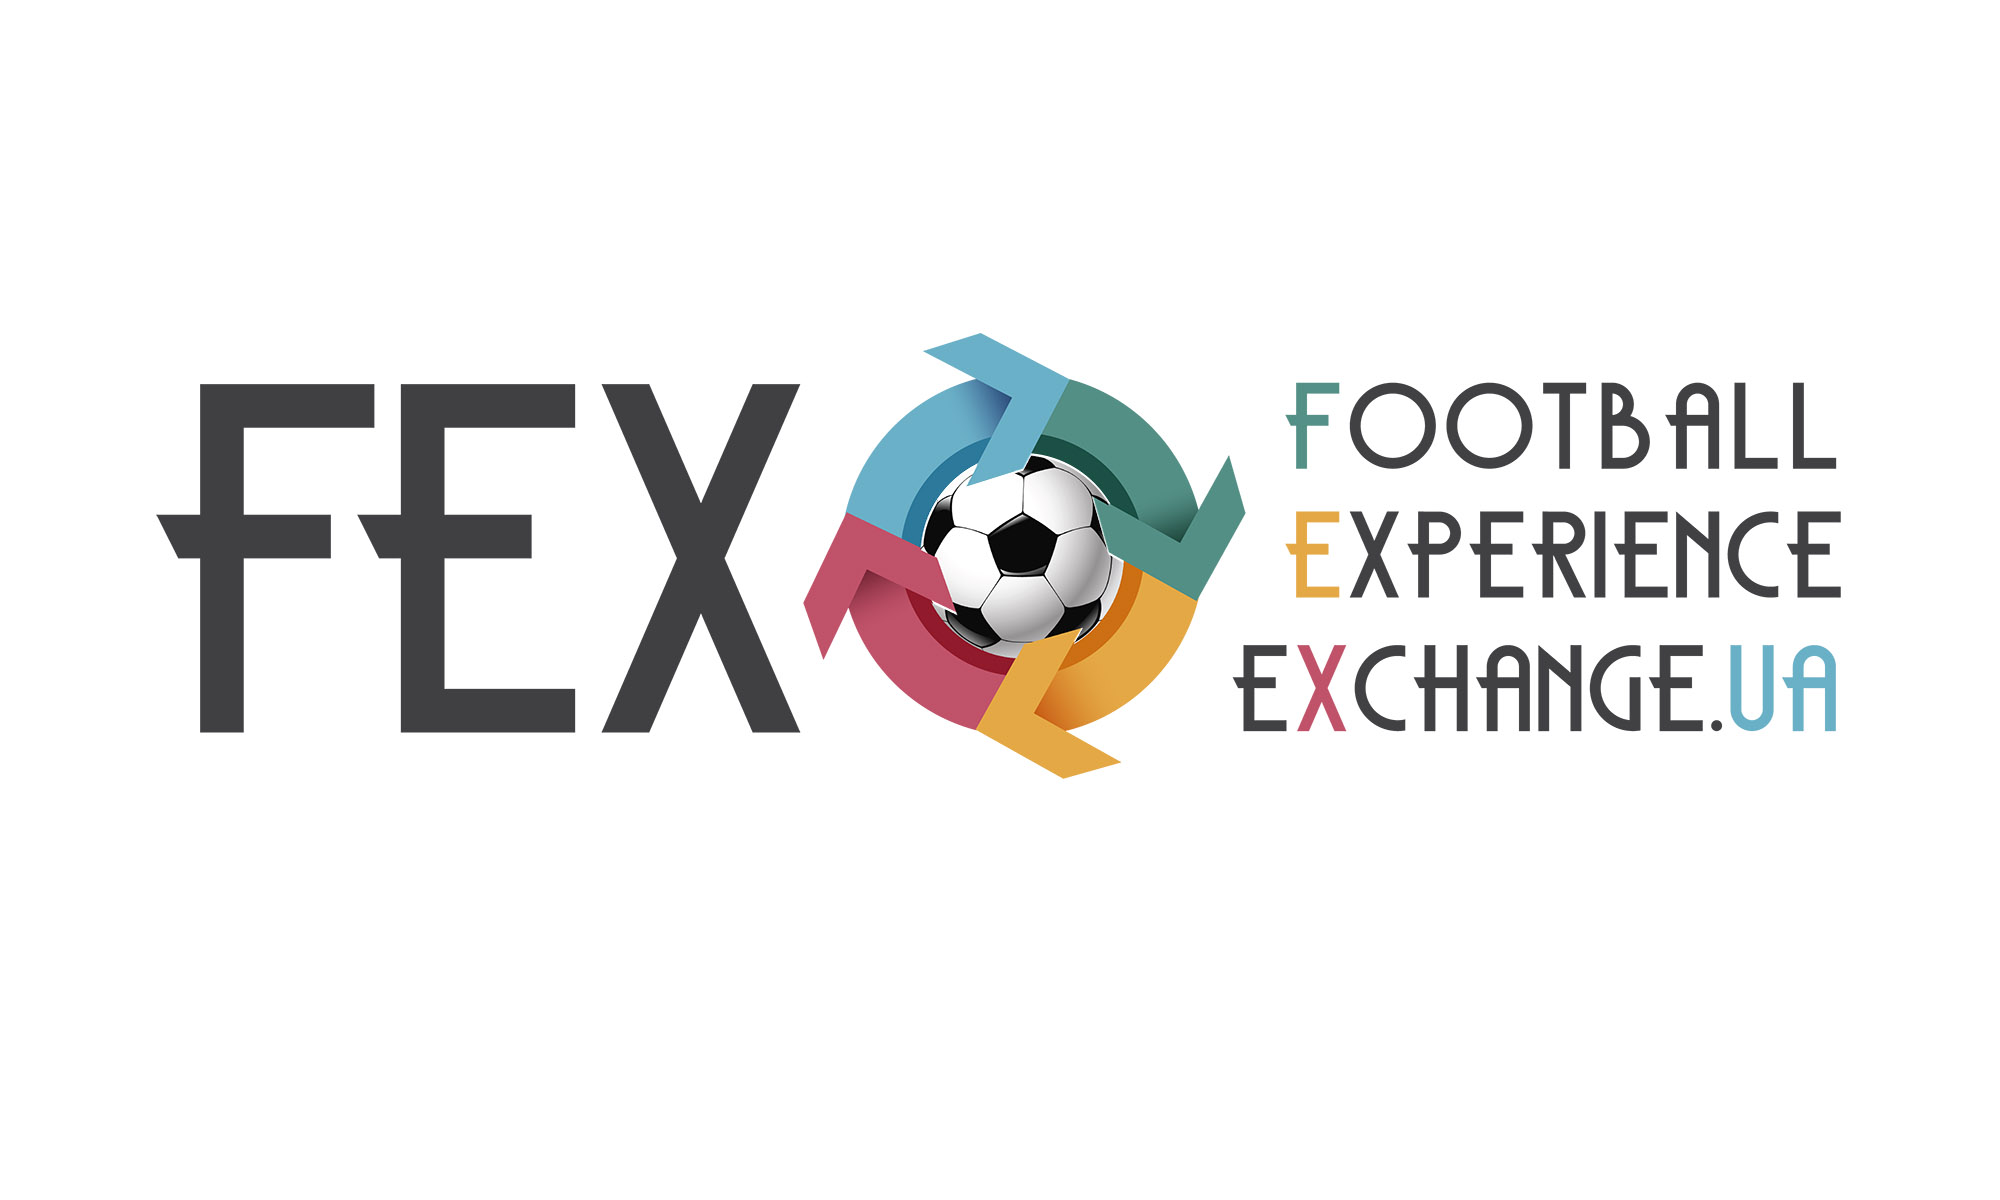 FEX: Football Experience Exchange